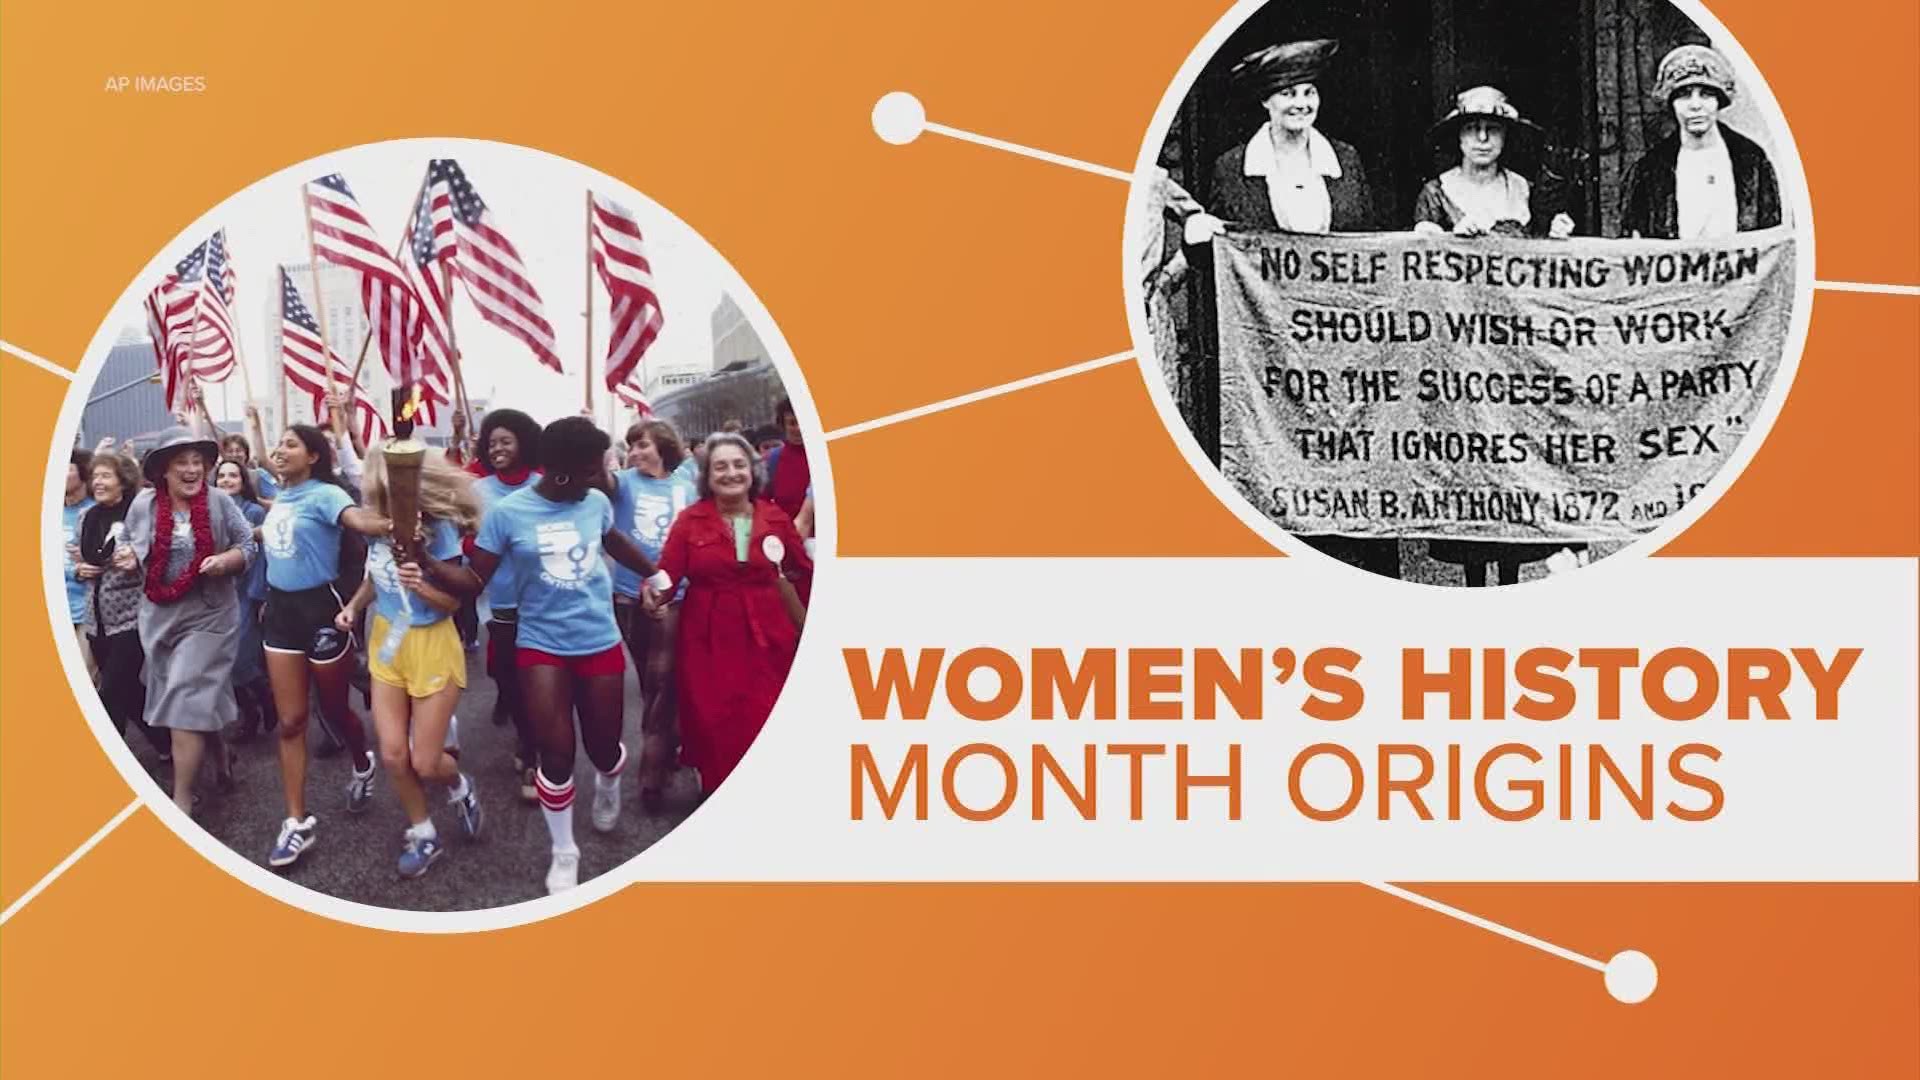 The origins of women’s history month are traced back to a school teacher Molly Murphy MacGregor in Sonoma County California in the 1970s.